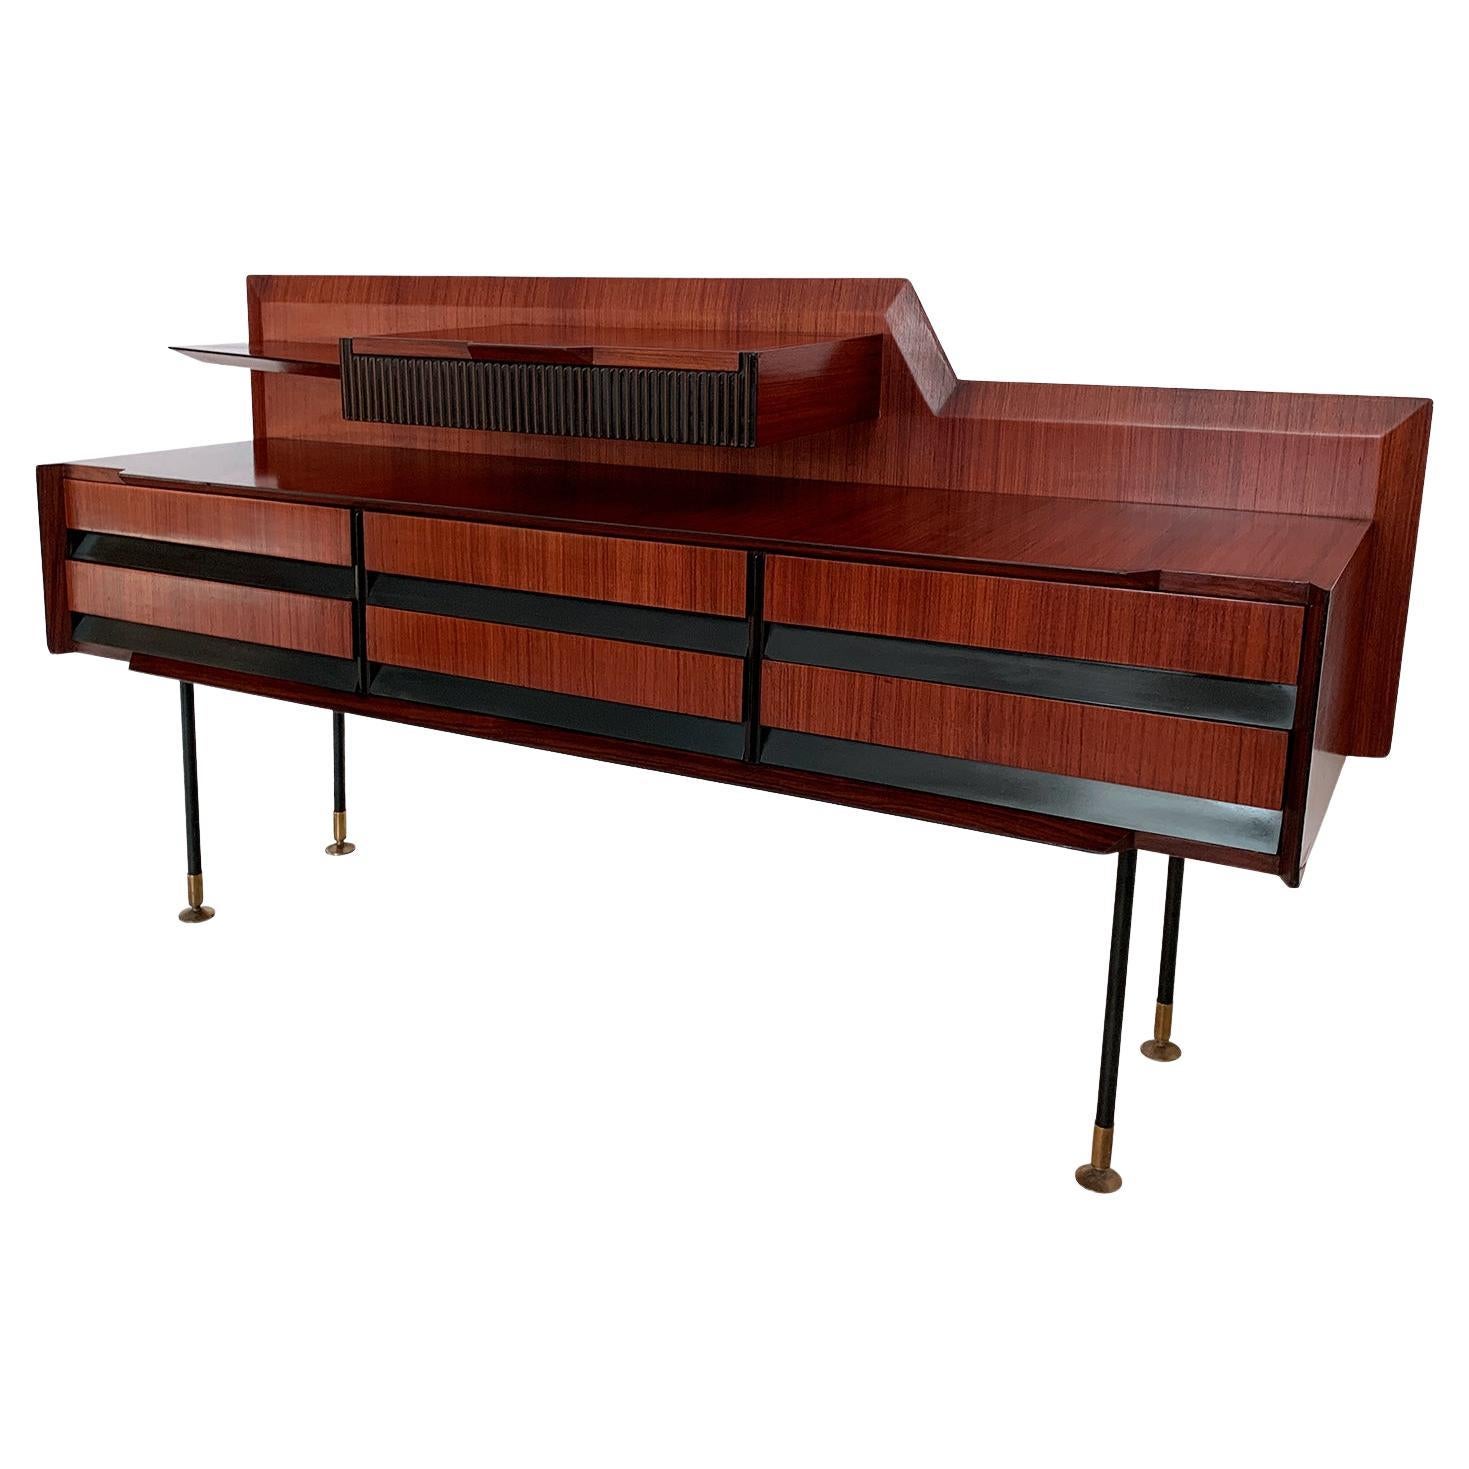 Italian Mid-Century Teak Wood Sideboard with Drawers by Vittorio Dassi, 1950s